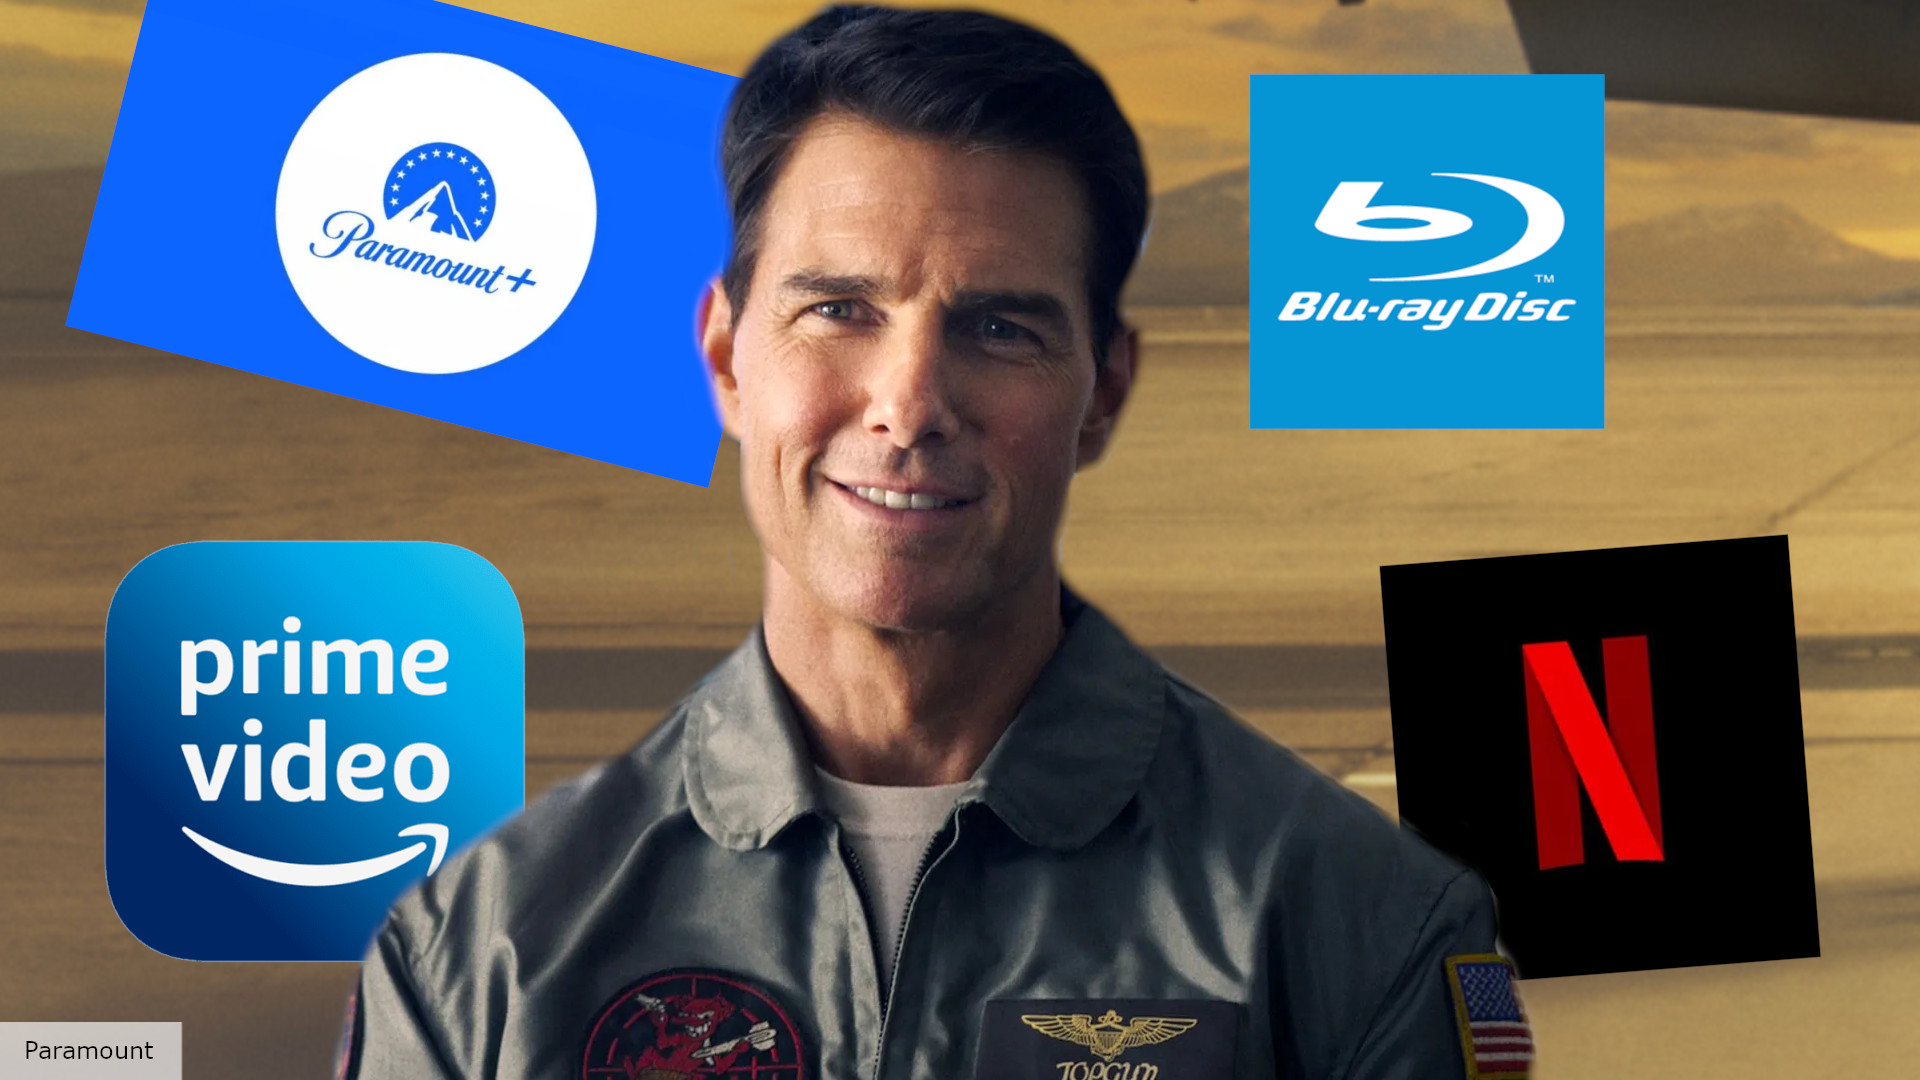 Top Gun: Maverick' on Paramount+: How to Watch for Free